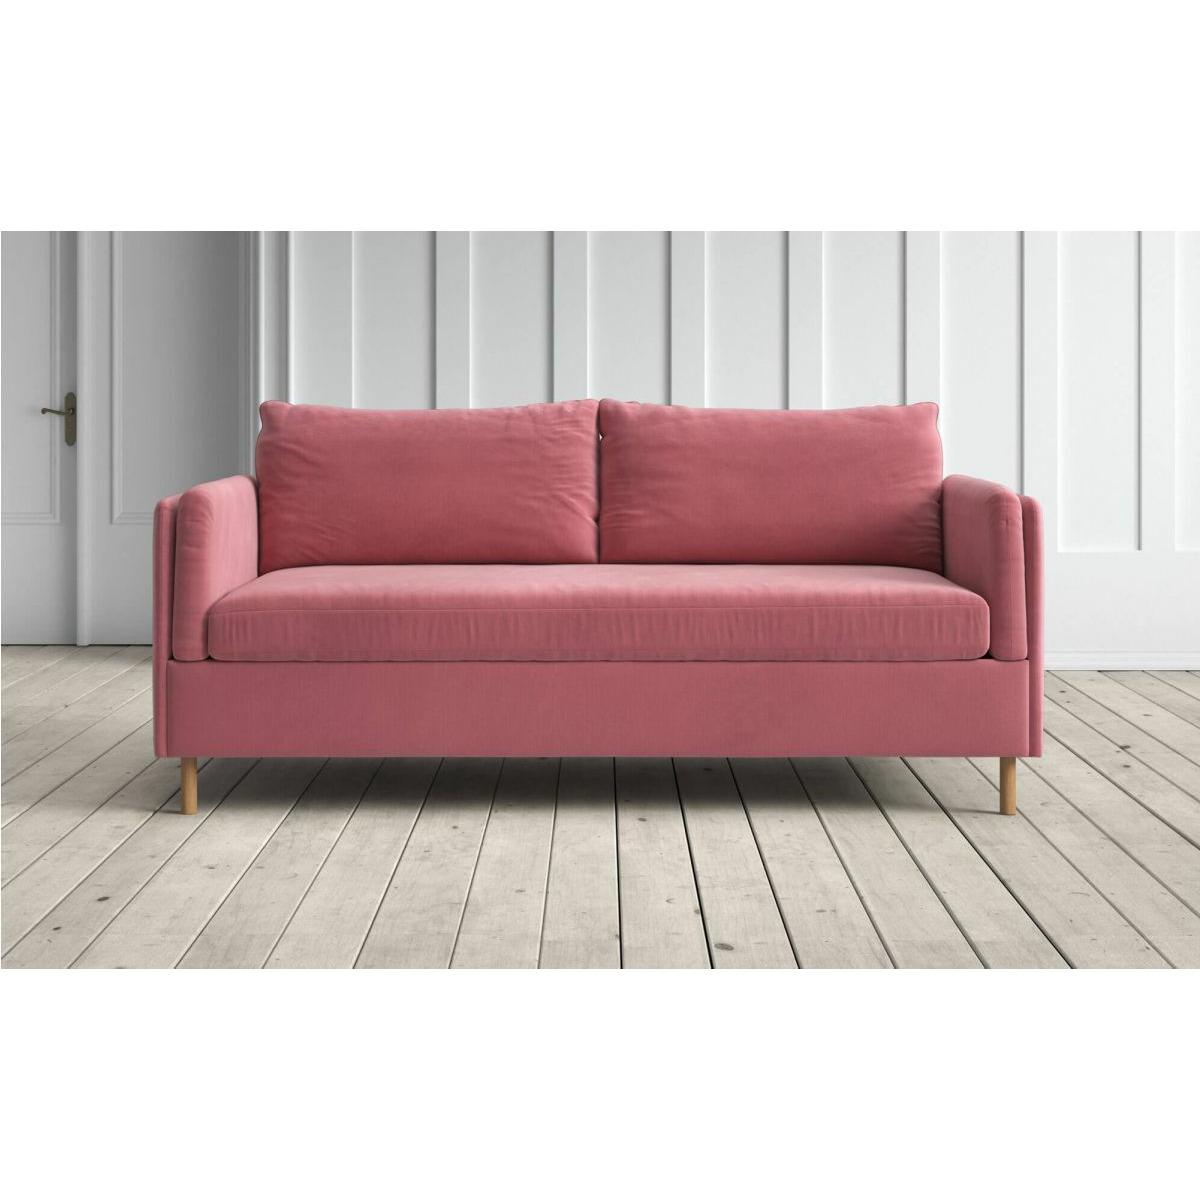 Graham and Green Edwina 2.5 Seater Sofa Bed in Pink Classic Velvet